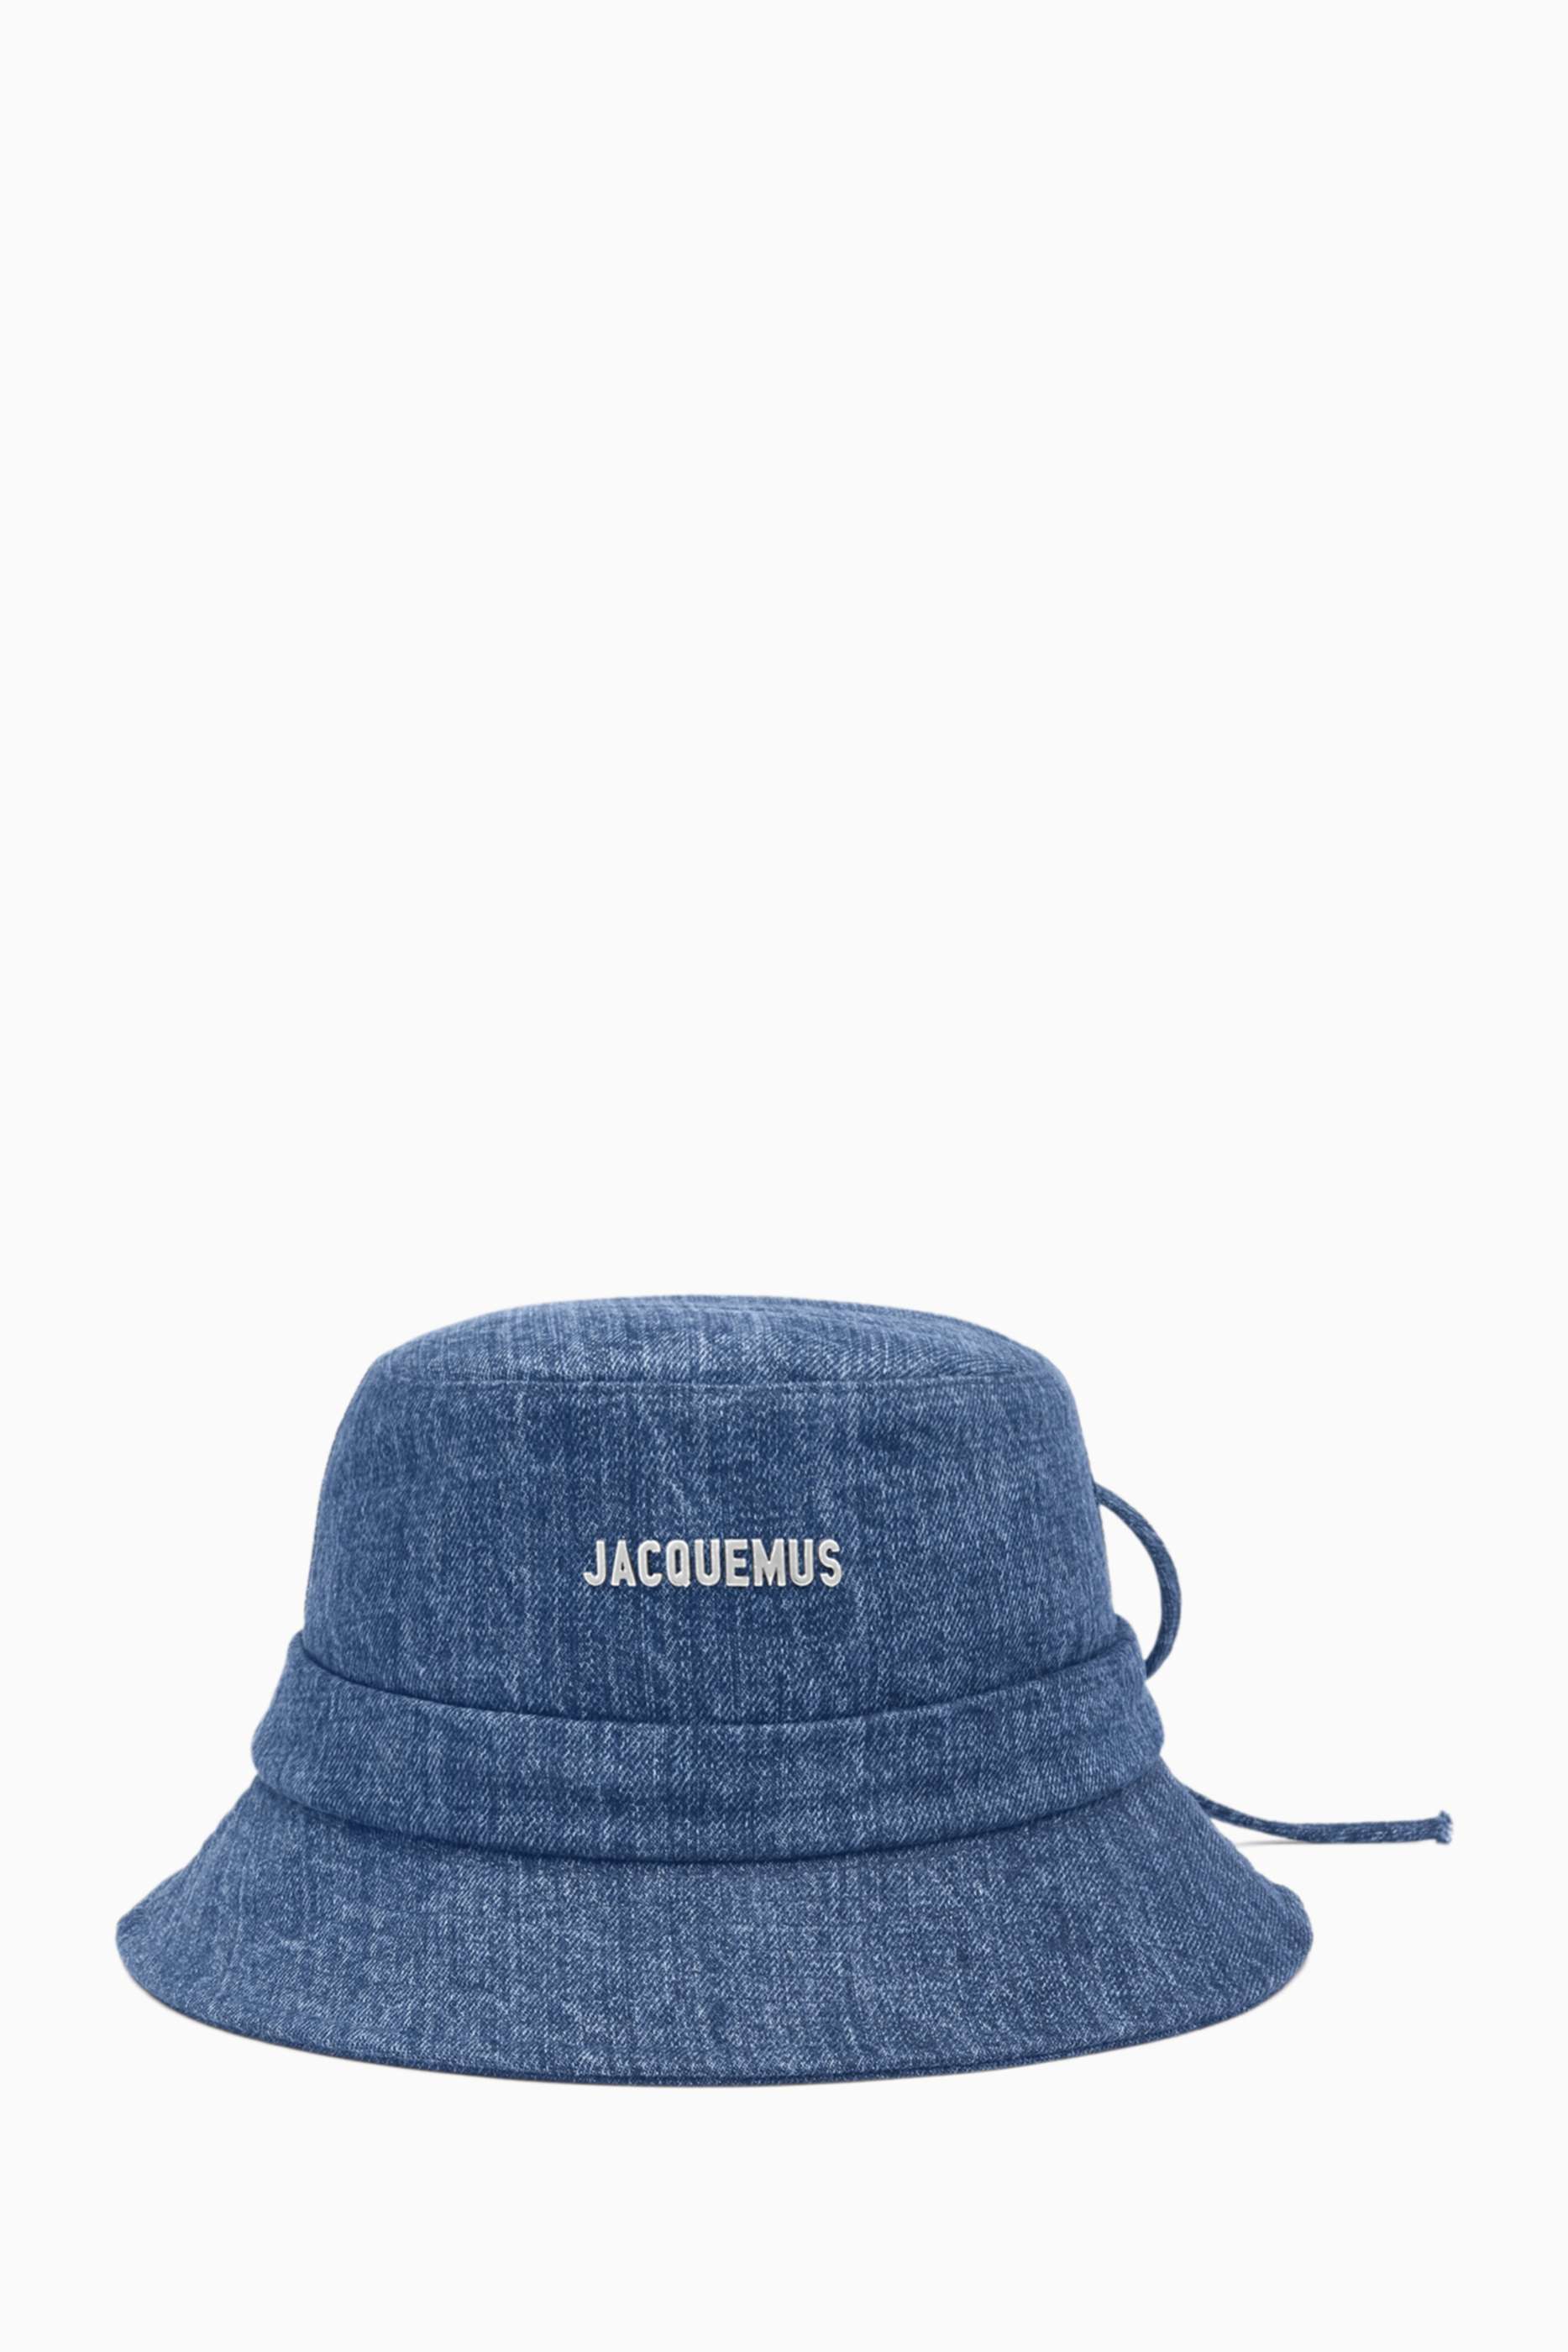 shop-jacquemus-knotted-bucket-hat-in-denim-for-women